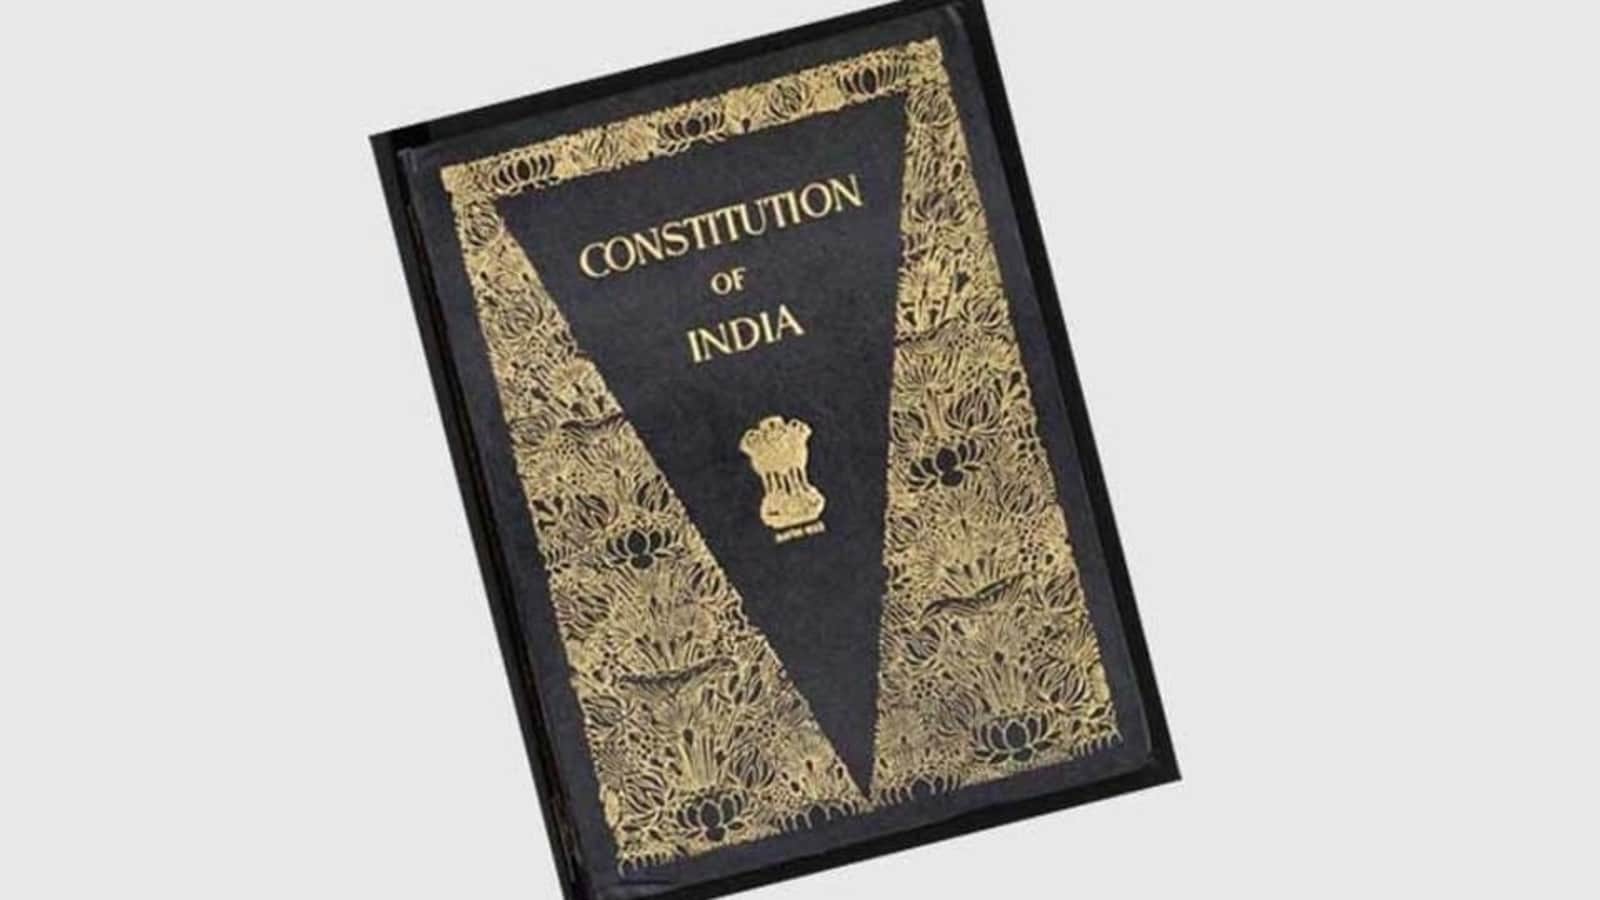 right to property under indian constitution